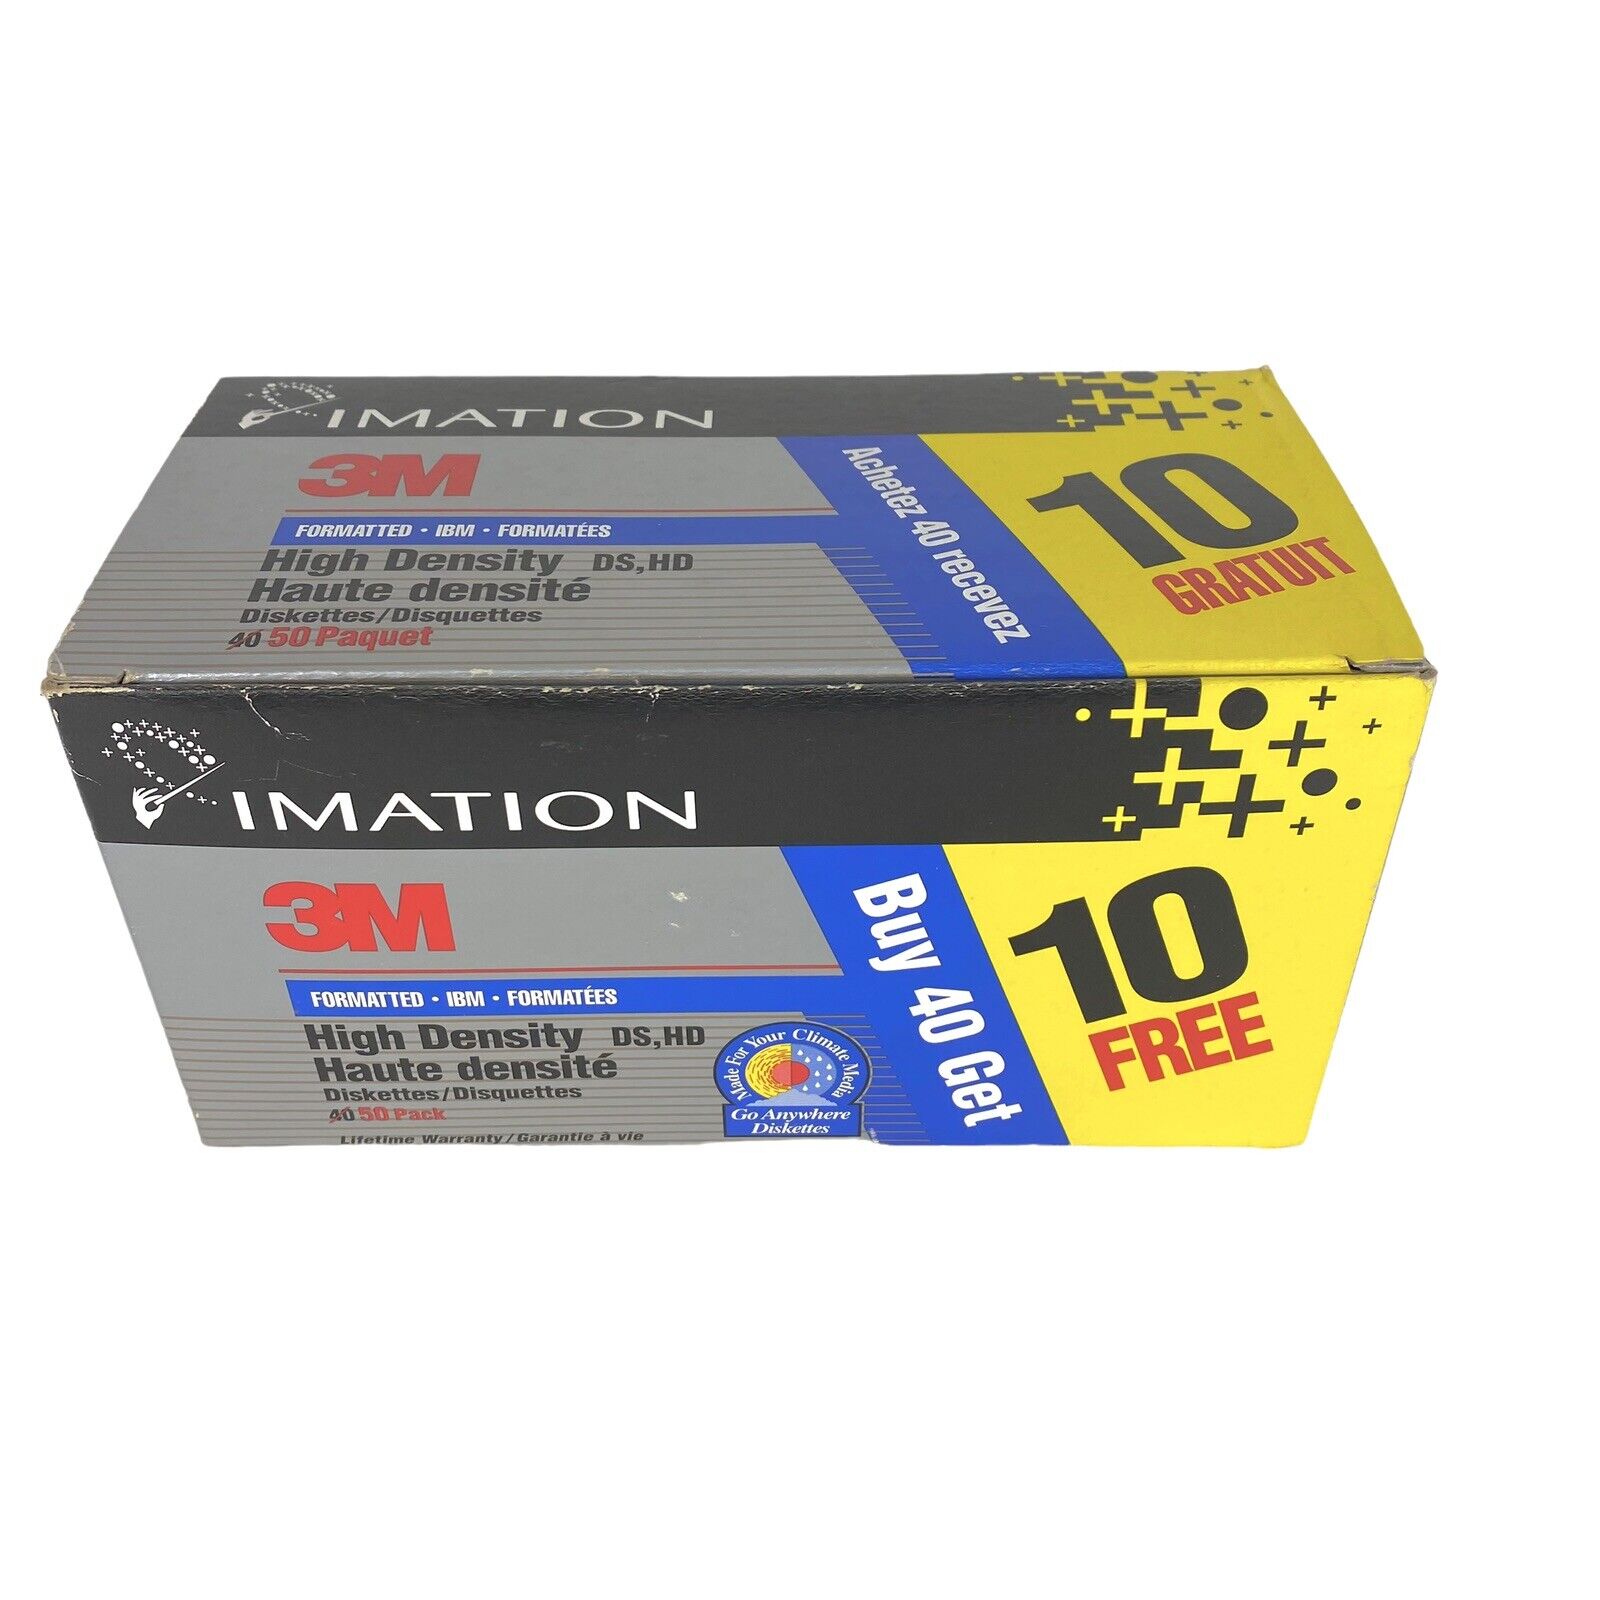 Imation 3M 3.5” Floppy Disks Box of 50 (40 + 10) Open Box 1.44 MB Formatted IBM